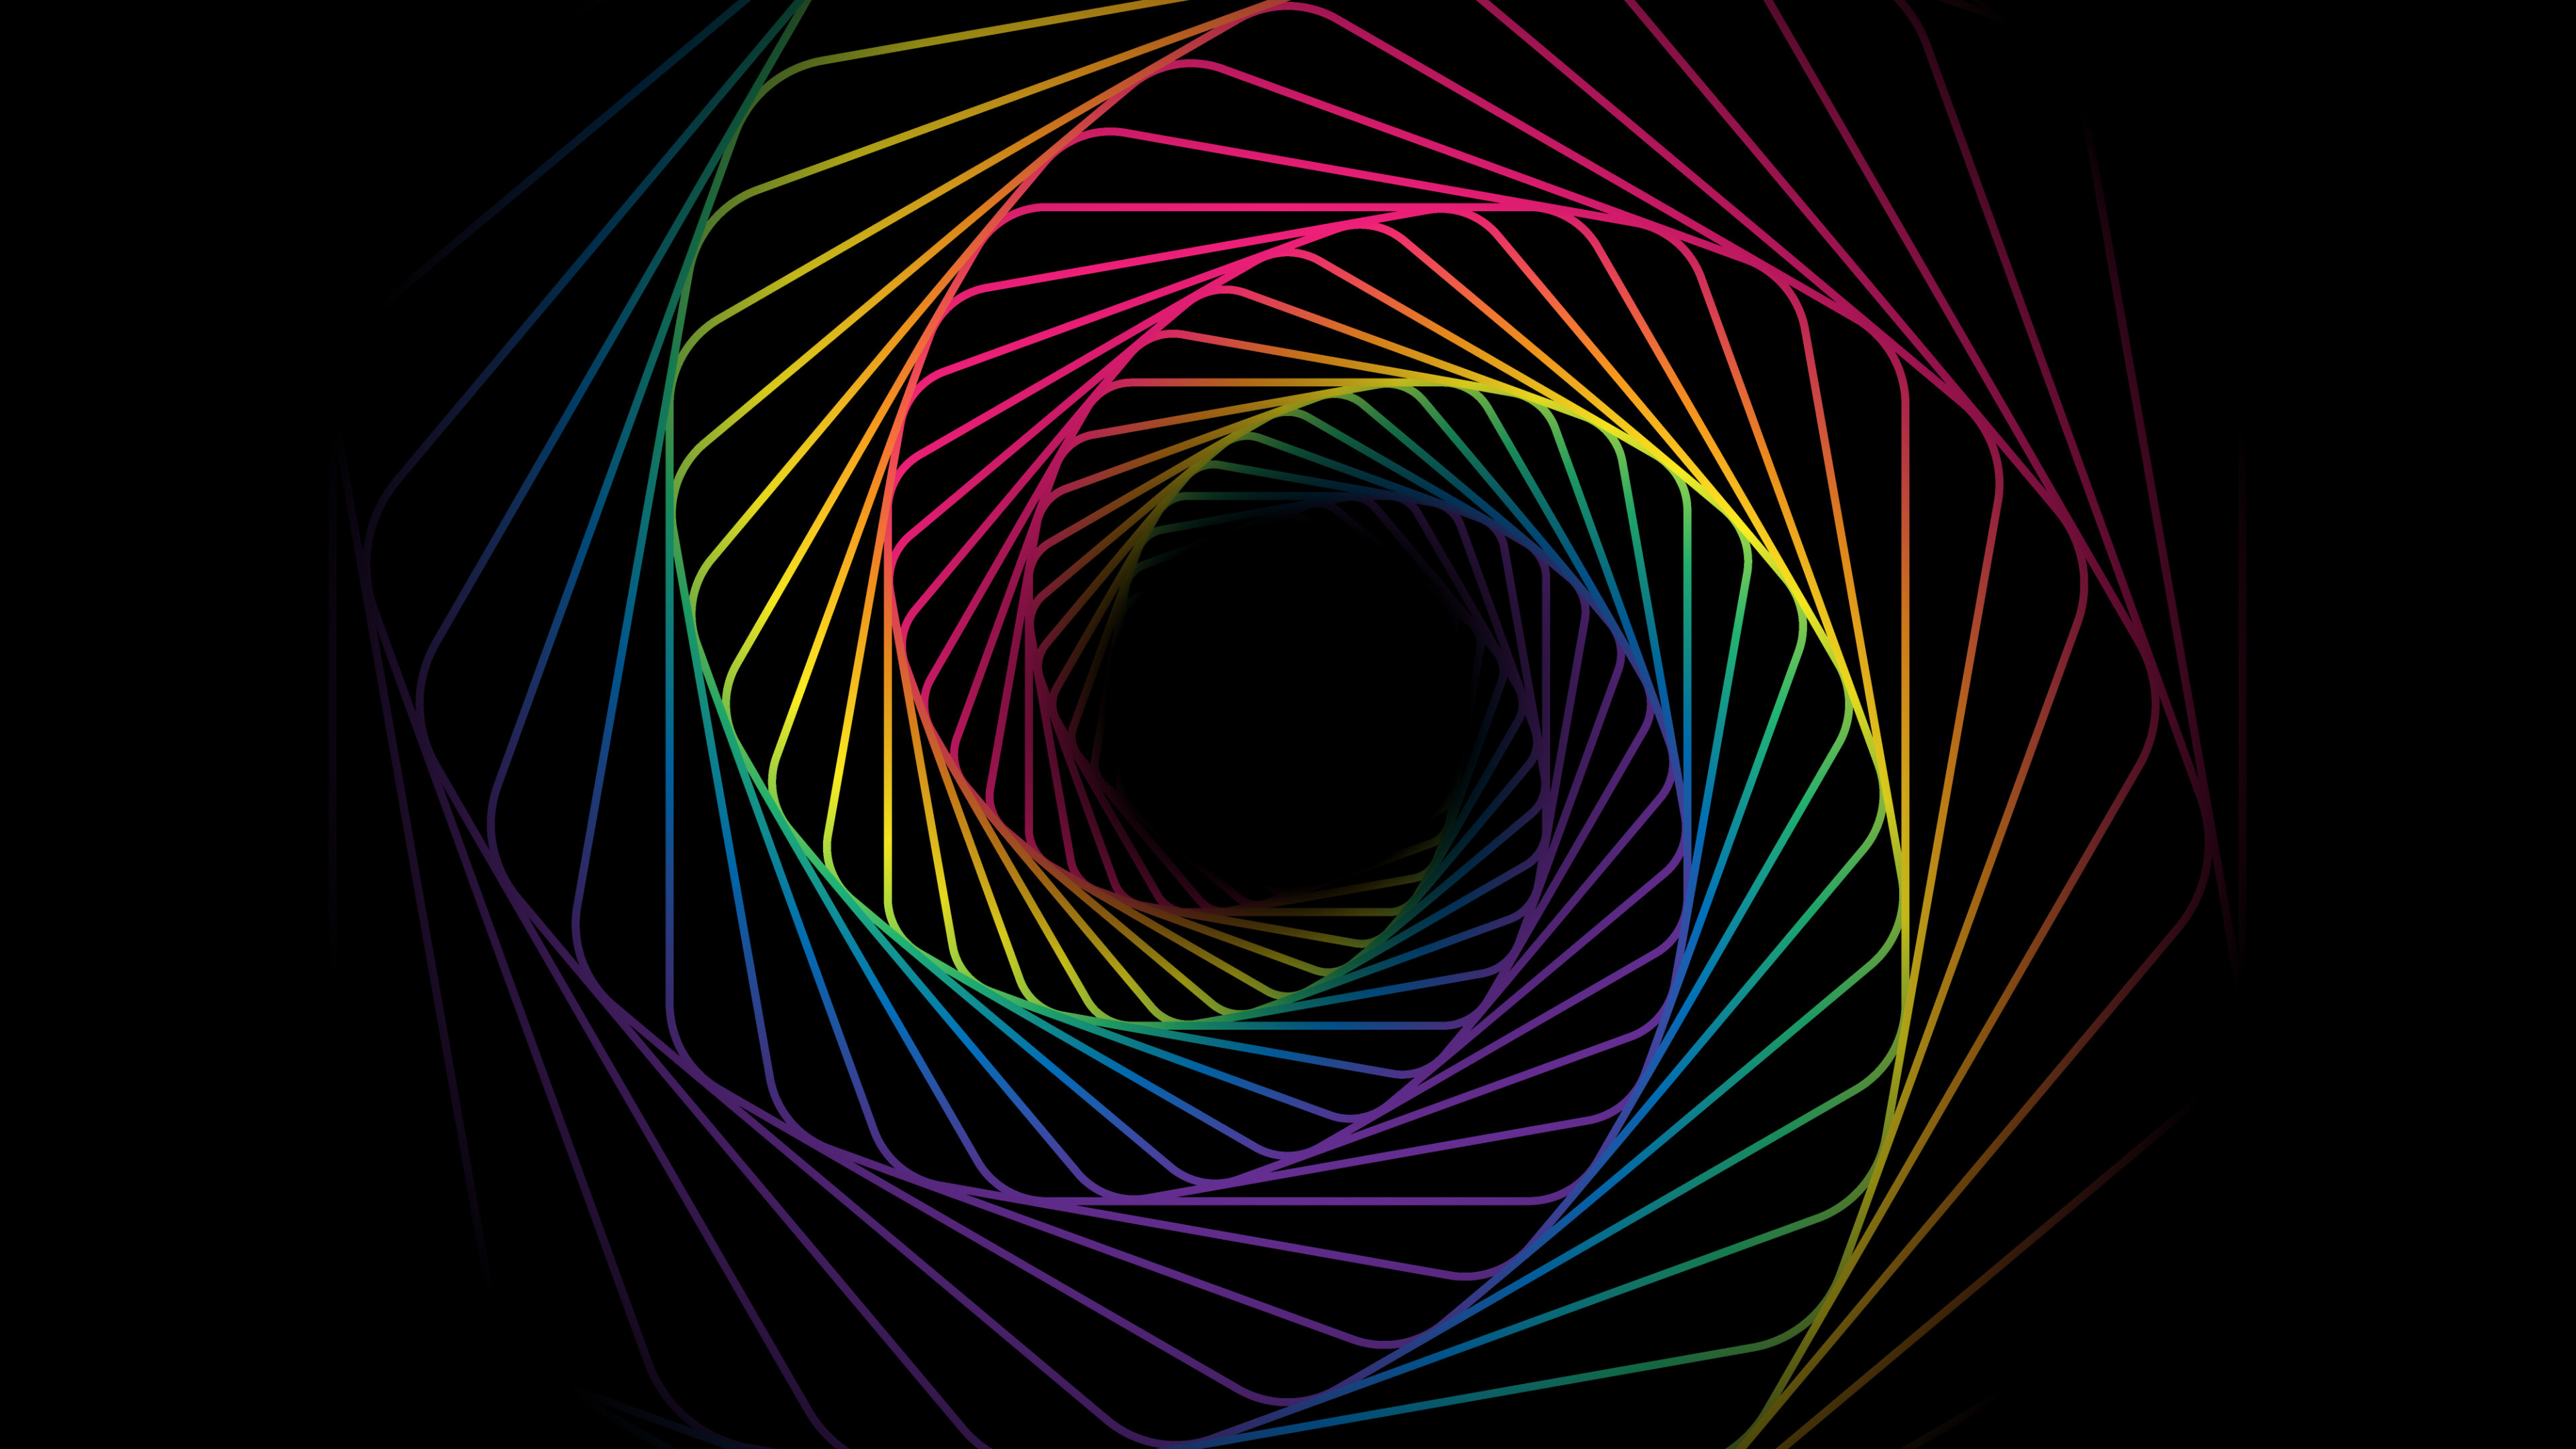 Rainbow Colors: Swirl, Spiral, Abstract, Geometric art, Lines. 3840x2160 4K Background.